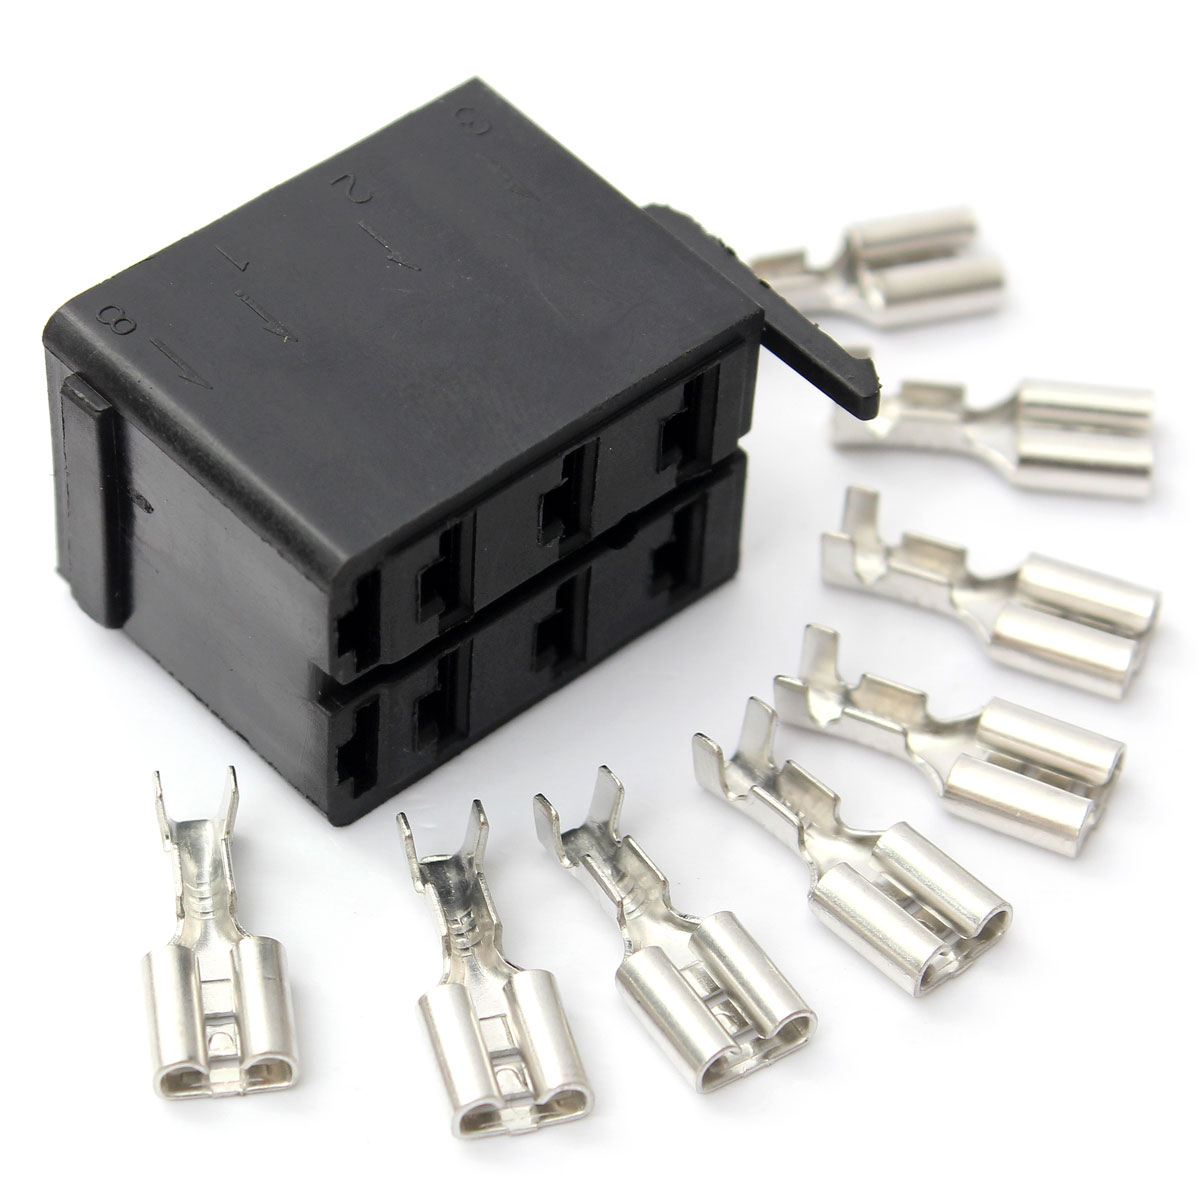 1 QTY CARLING ROCKER SWITCH WIRING CONNECTOR KIT